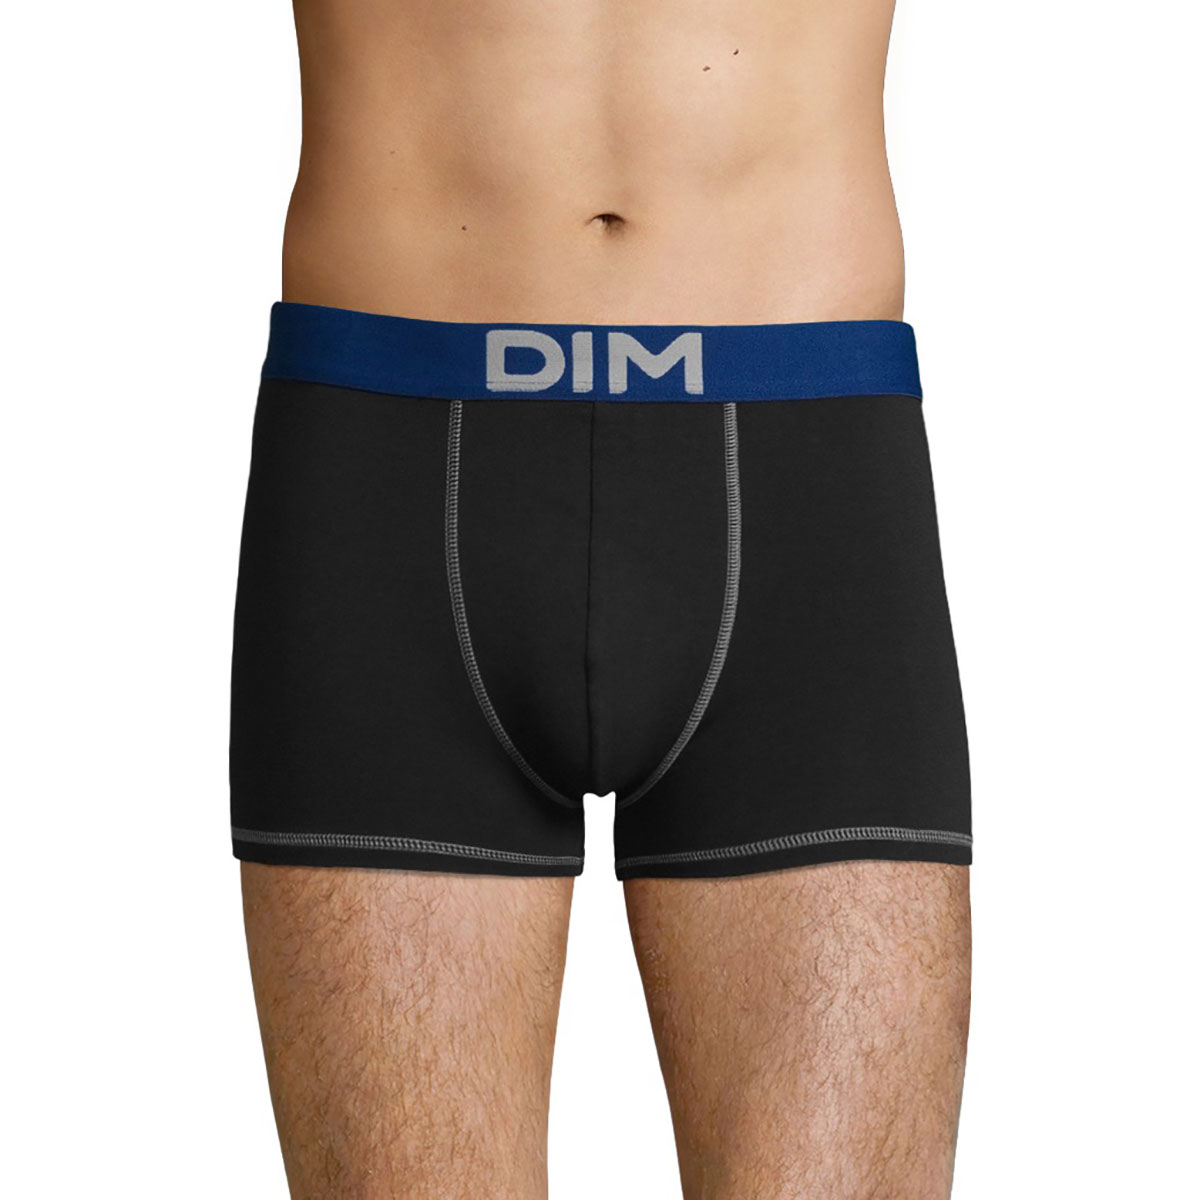 Men's stretch cotton trunks in Black and Azure Color Mix